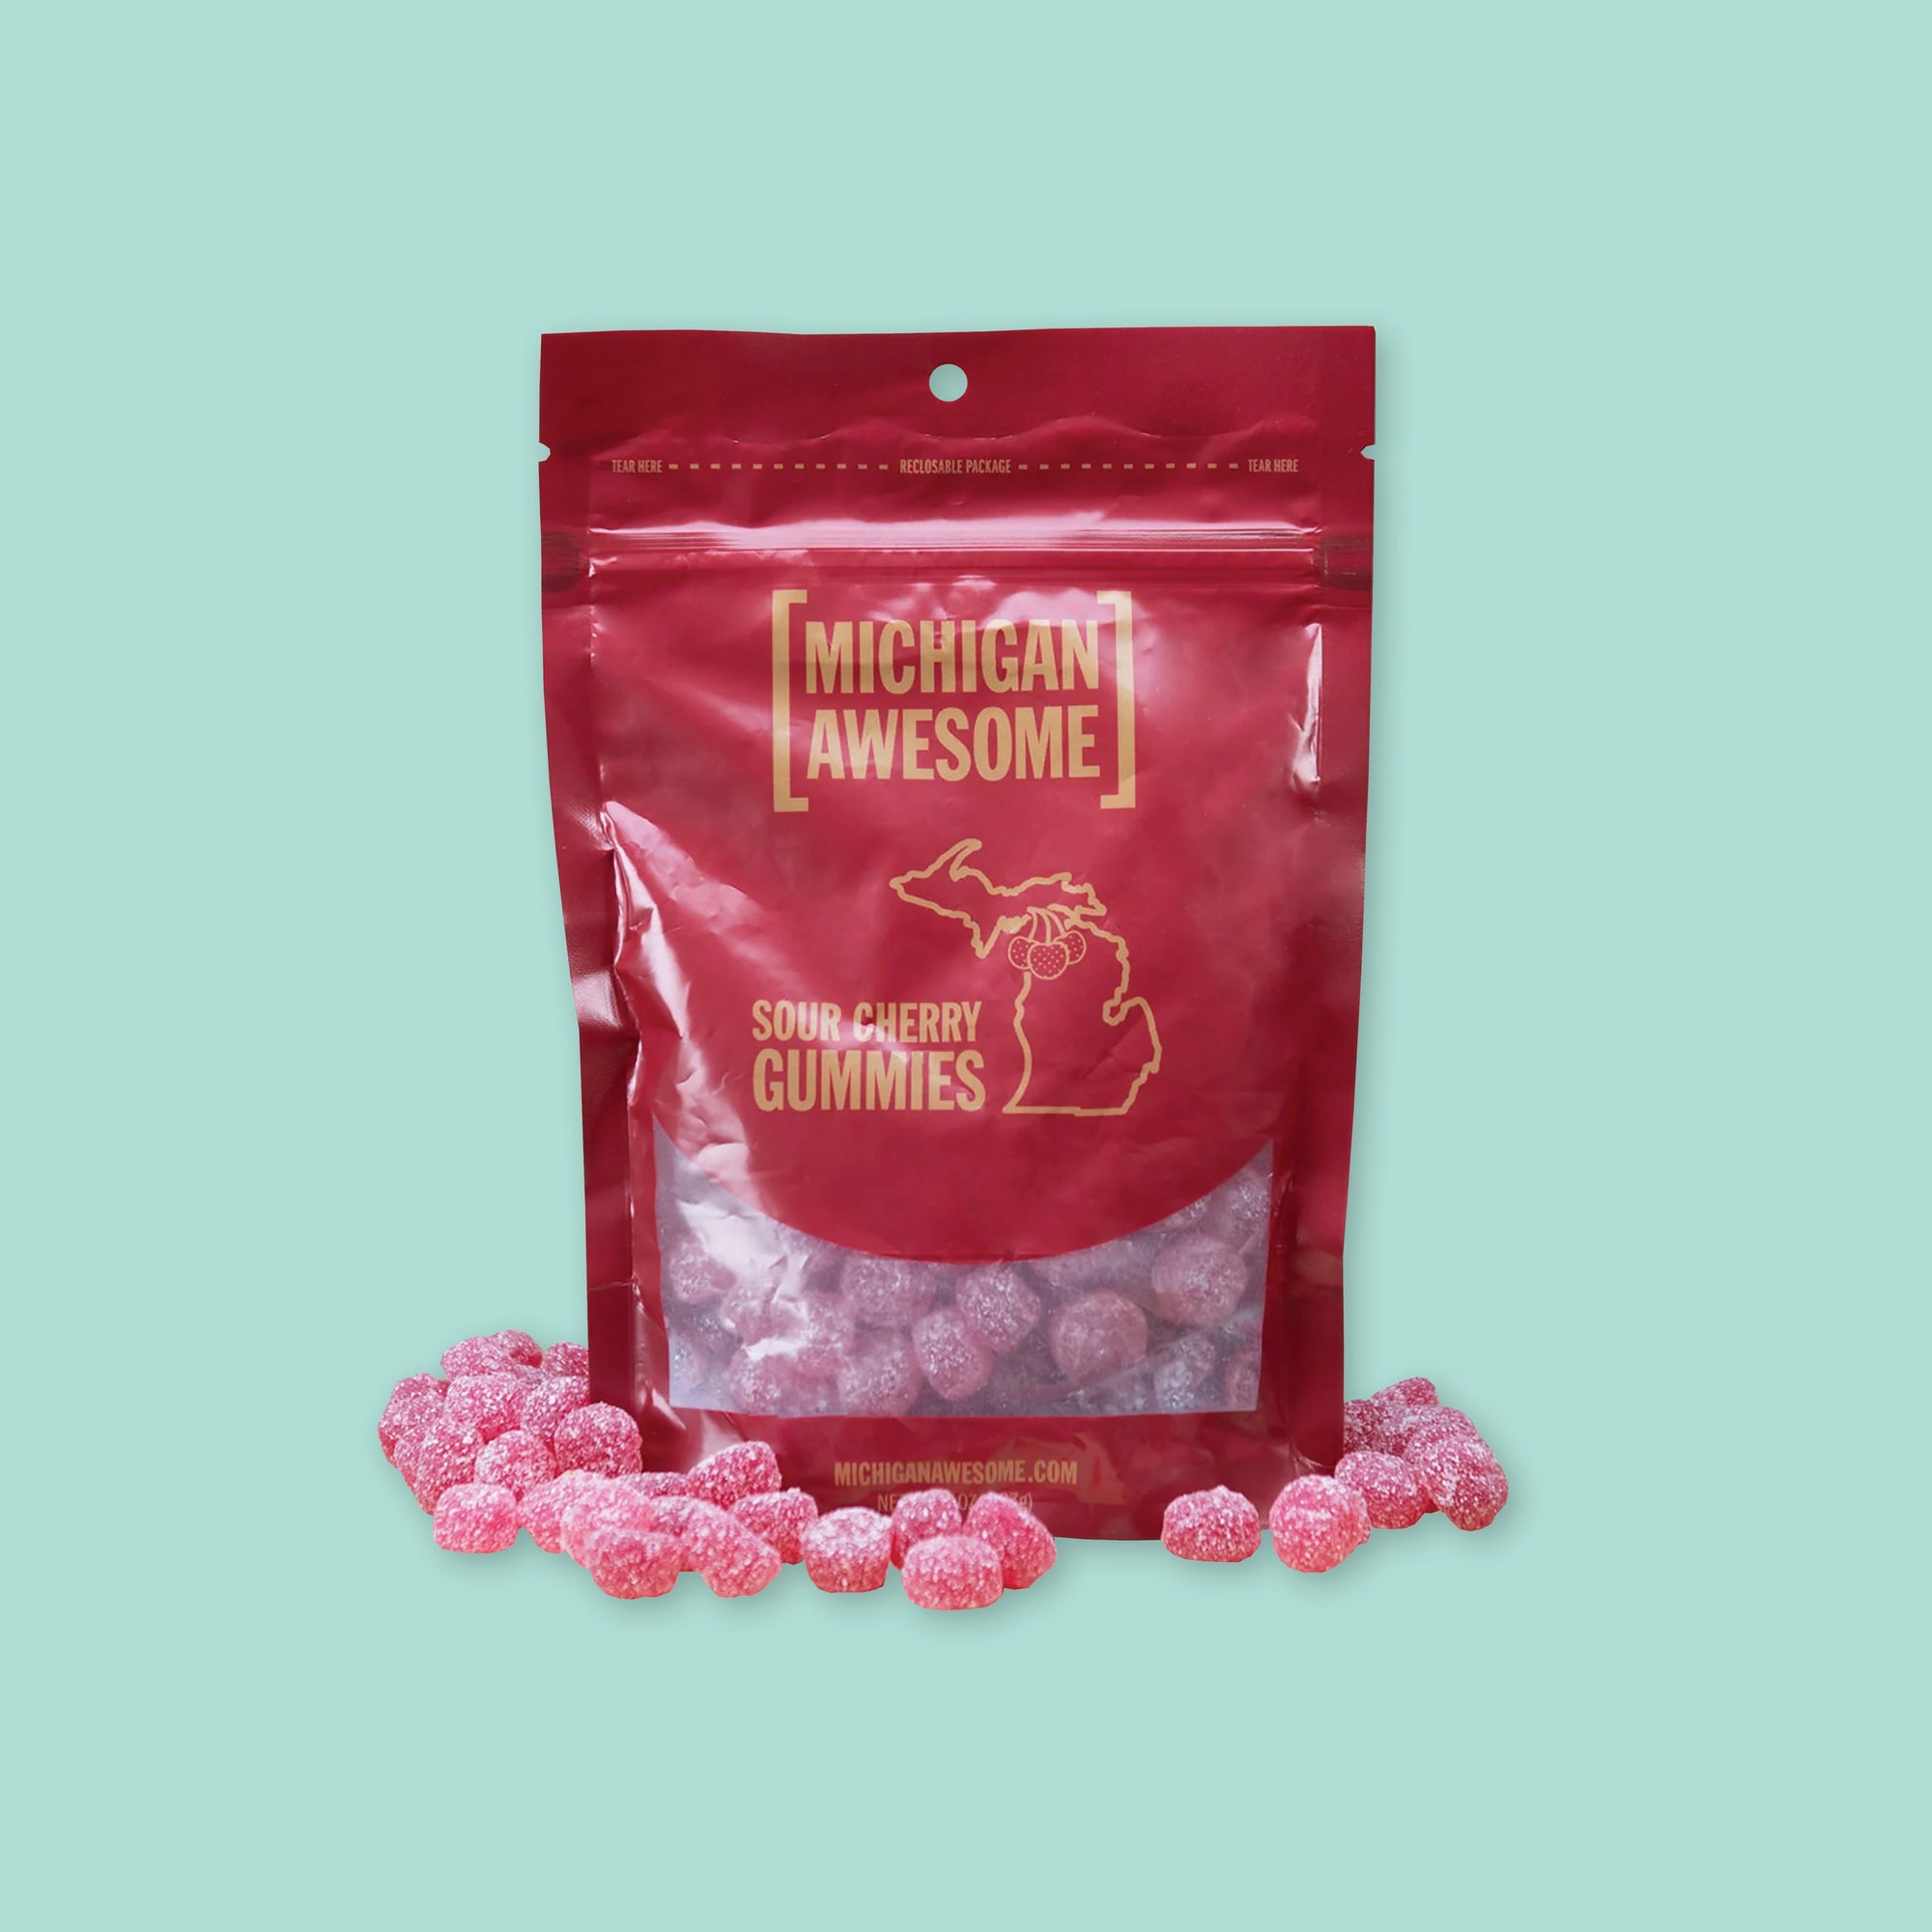 On a mint green background sits a red package that is see-through at the bottom. It is filled with sugar sour cherry gummies. It says "MICHIGAN AWESOME," and "SOUR CHERRY GUMMIES" in goldish-yellow, all caps block font. It has an outlined illustration of the state of Michigan-UP with cherries. There are sugar sour cherry gummies sitting around the bag.